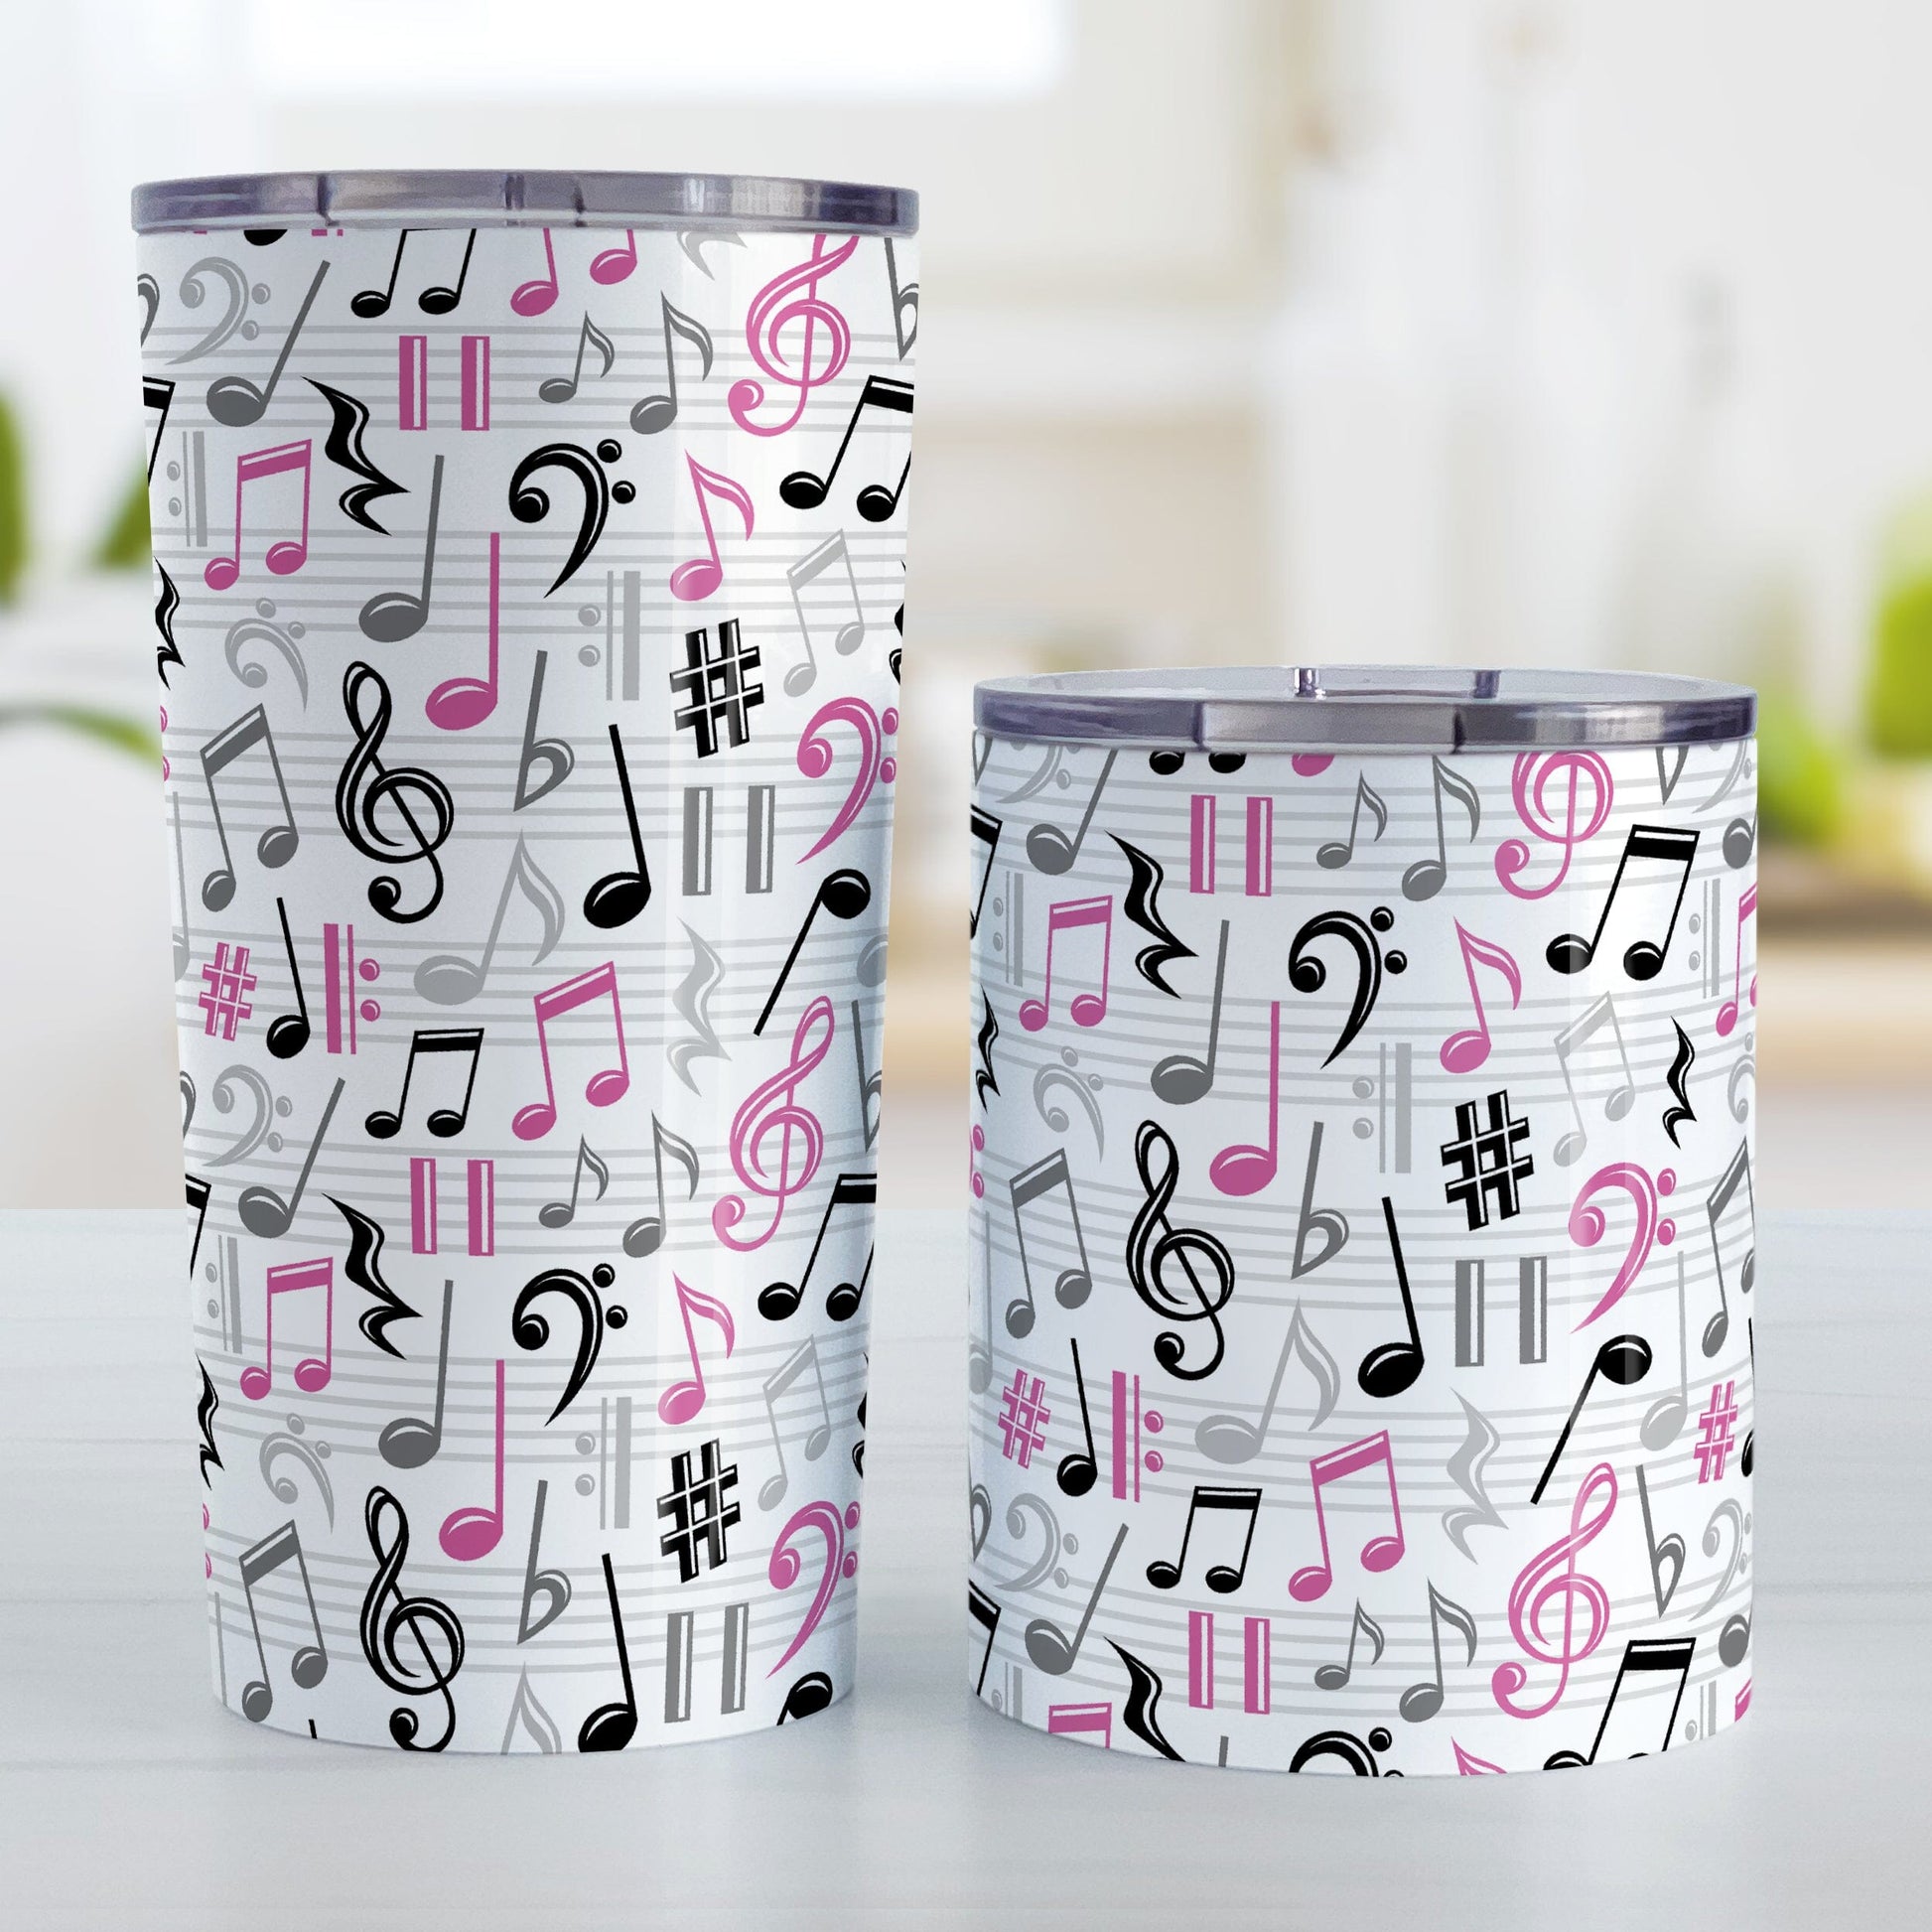 Pink Music Notes Pattern Tumbler Cups (20oz or 10oz) at Amy's Coffee Mugs. Stainless steel tumbler cups designed with music notes and symbols in pink, black, and gray in a pattern that wraps around the cups. Photo shows both sized cups on a table next to each other. 